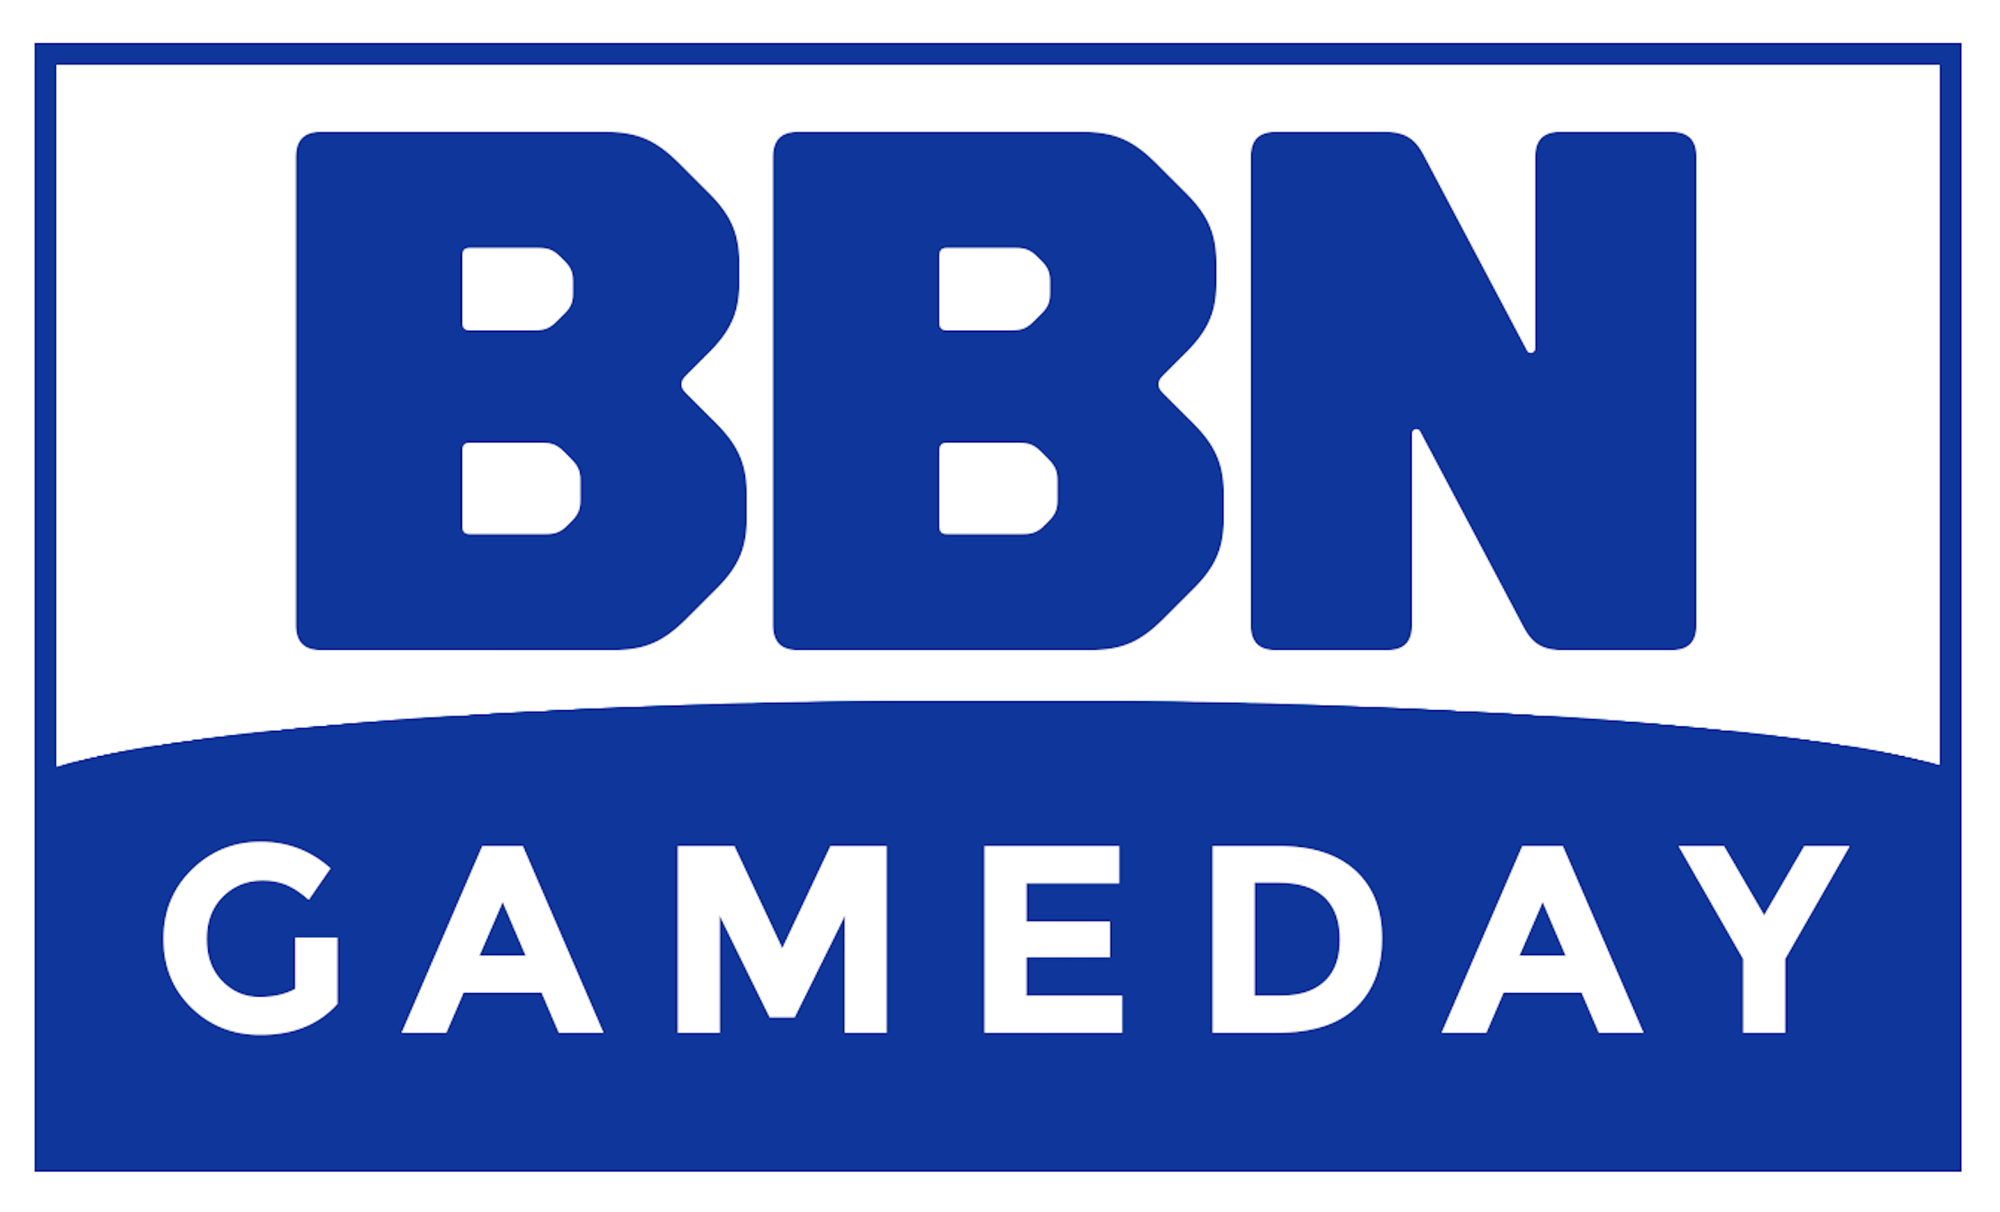 BBN Gameday, February 19th 2022